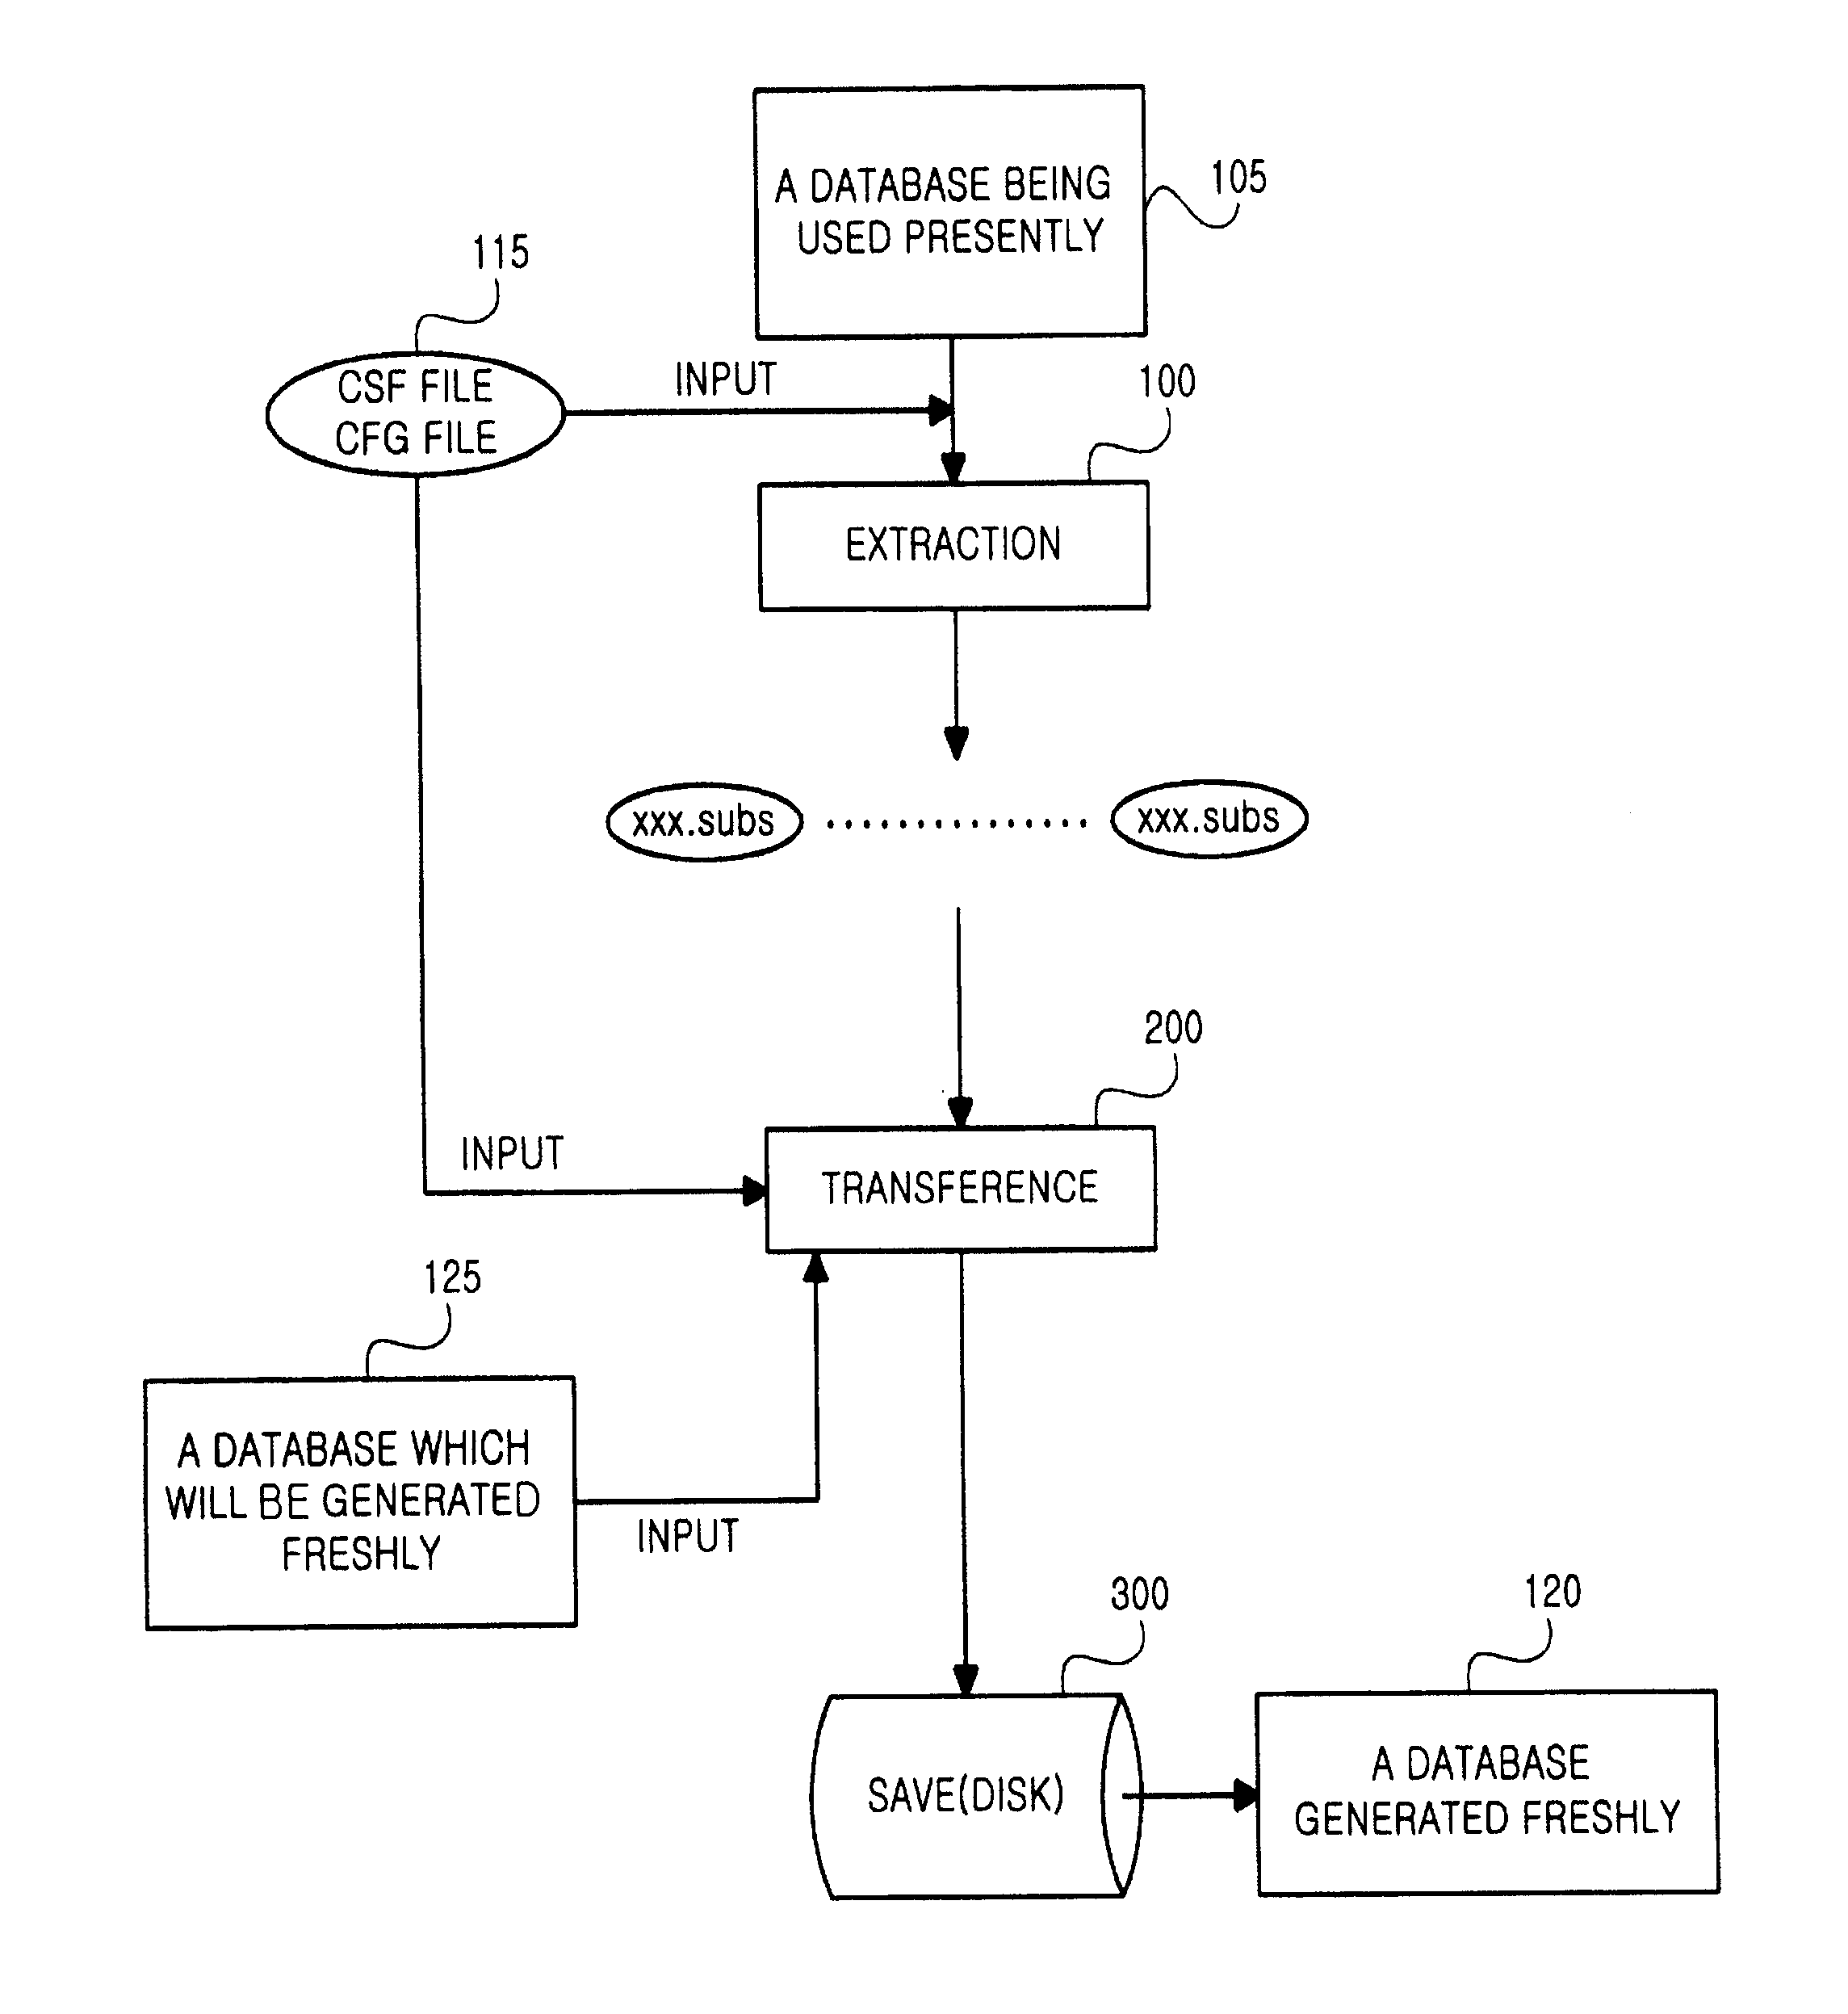 Method of modifying the home location register (HLR) system database for digital wireless communication whenever the database contents of main memory are altered